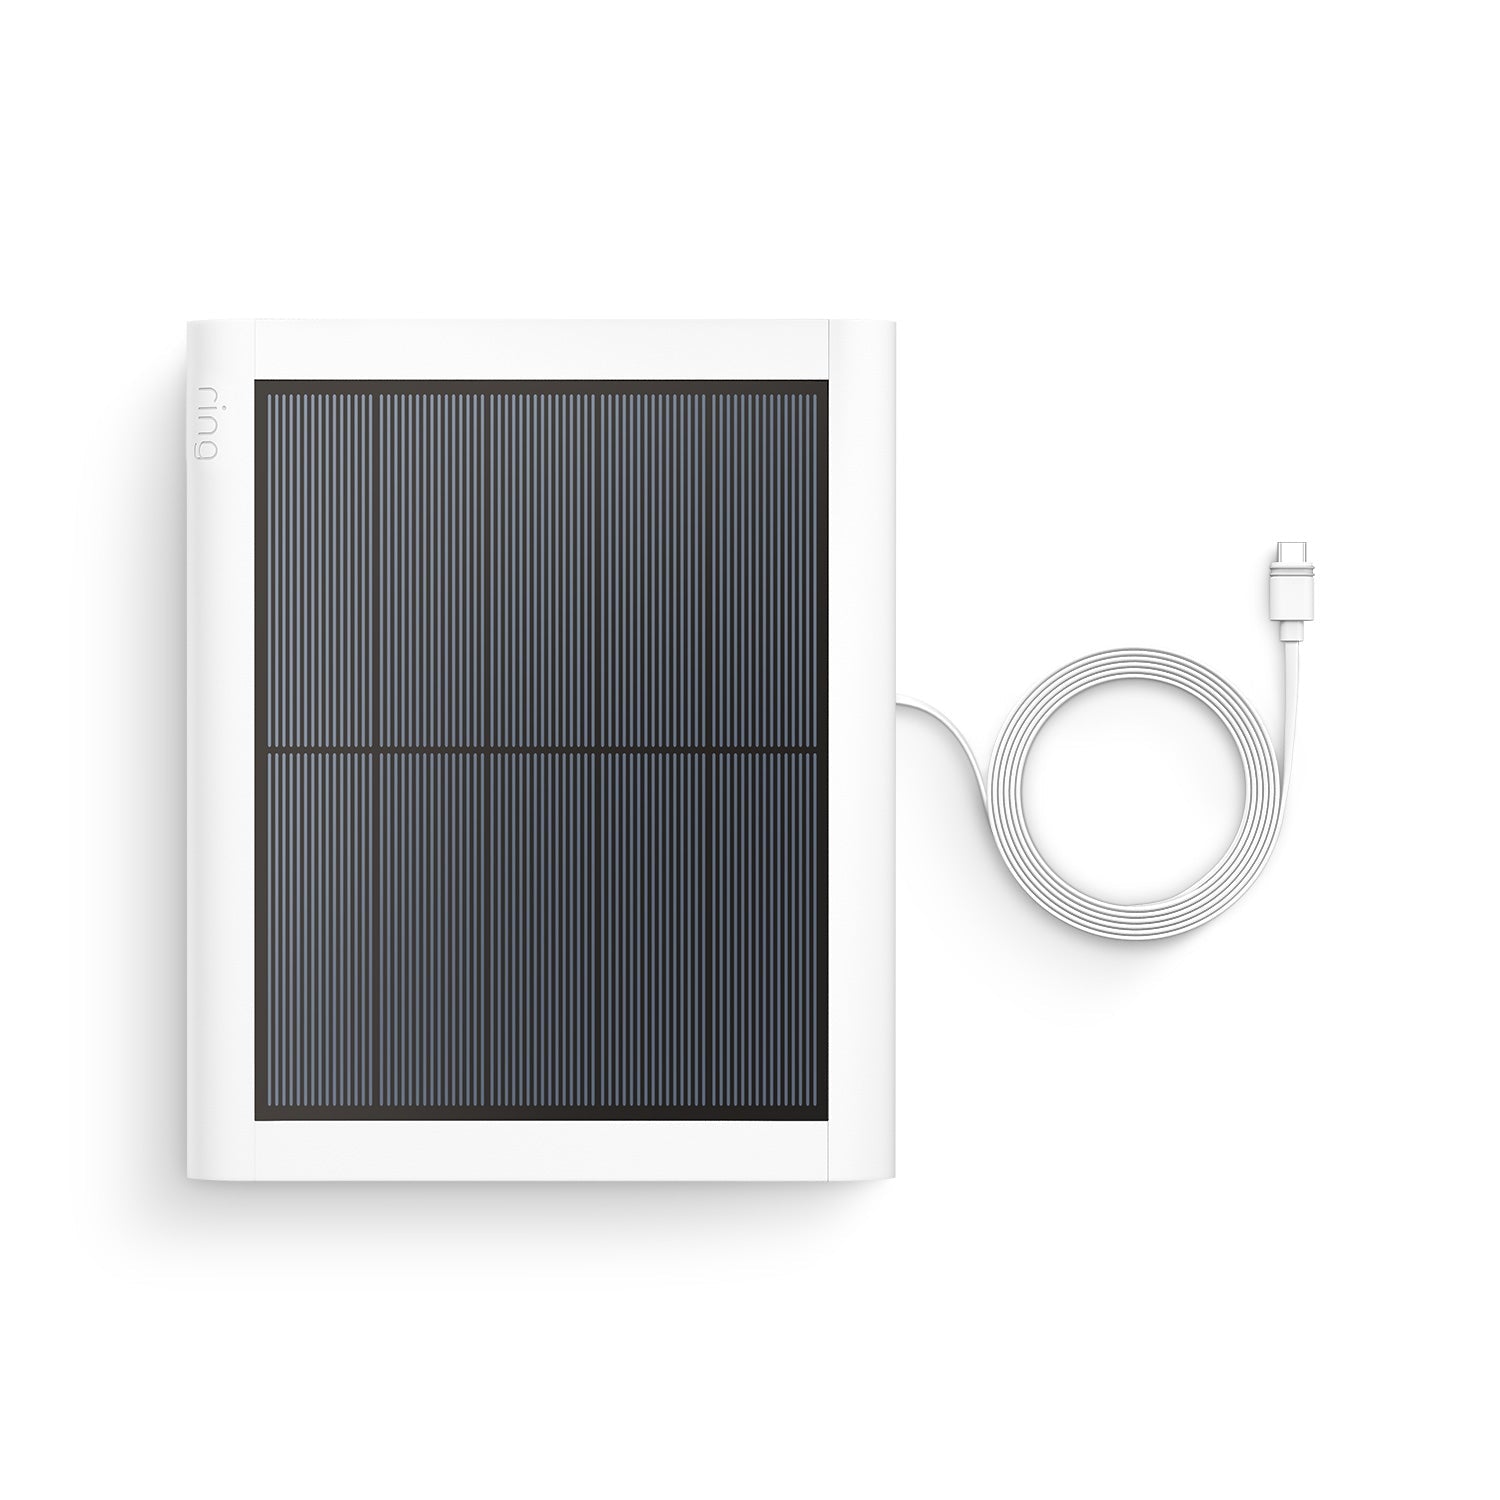 Solar Panel (USB-C) (for Stick Up Cam, Stick Up Cam Pro, Spotlight Cam Plus, Spotlight Cam Pro) - Solar Panel USB-C with connector cable in white